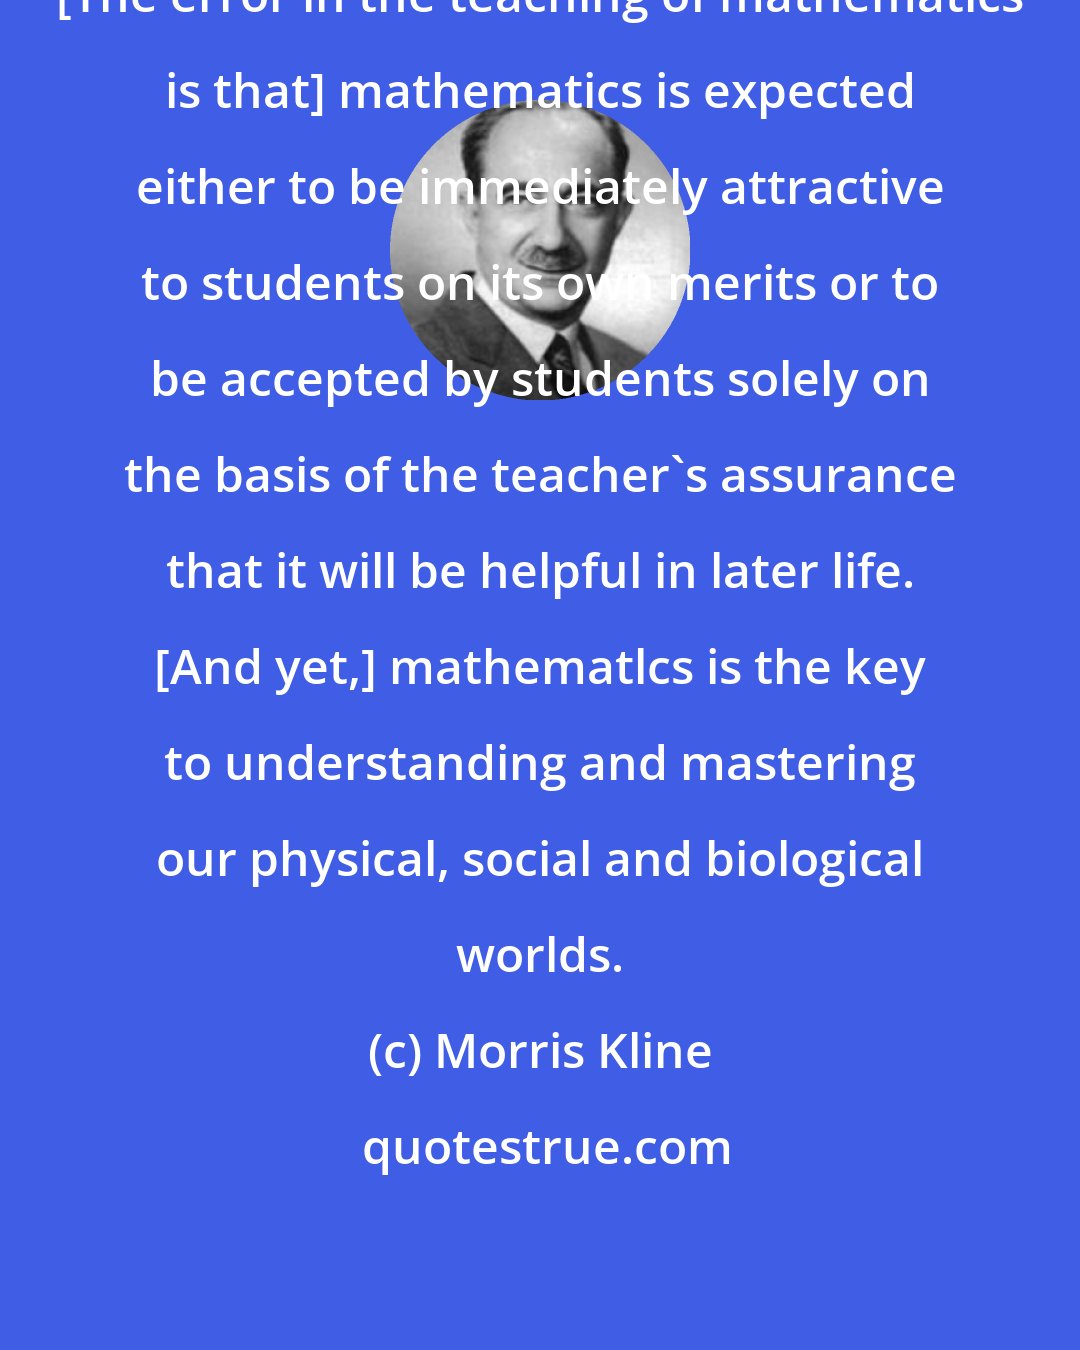 Morris Kline: [The error in the teaching of mathematics is that] mathematics is expected either to be immediately attractive to students on its own merits or to be accepted by students solely on the basis of the teacher's assurance that it will be helpful in later life. [And yet,] mathematlcs is the key to understanding and mastering our physical, social and biological worlds.